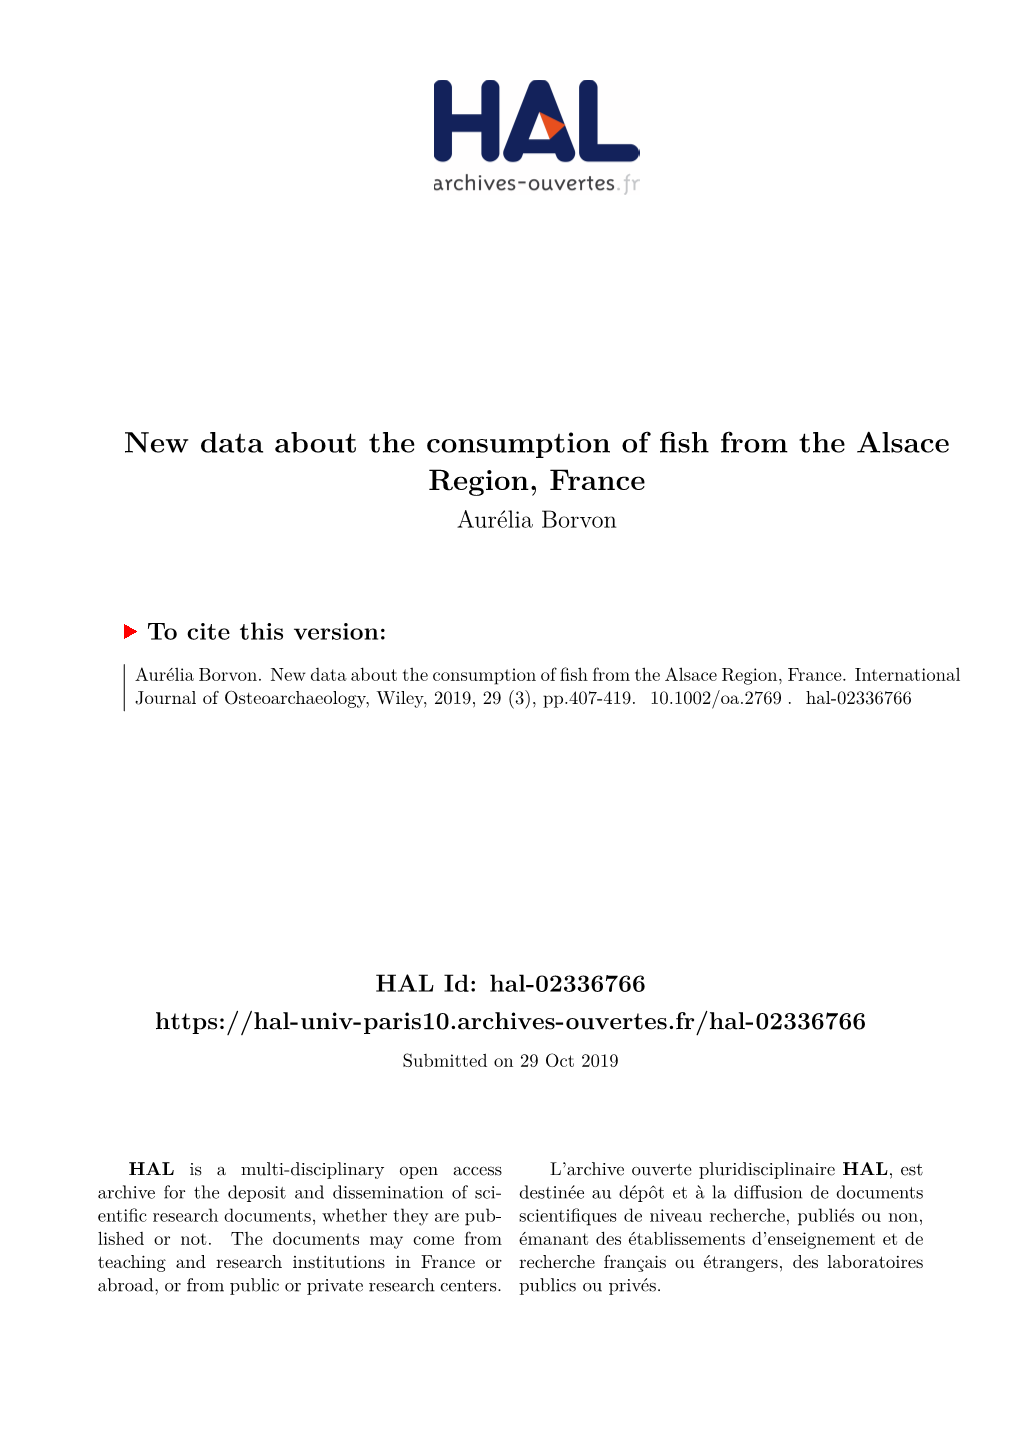 New Data About the Consumption of Fish from the Alsace Region, France Aurélia Borvon